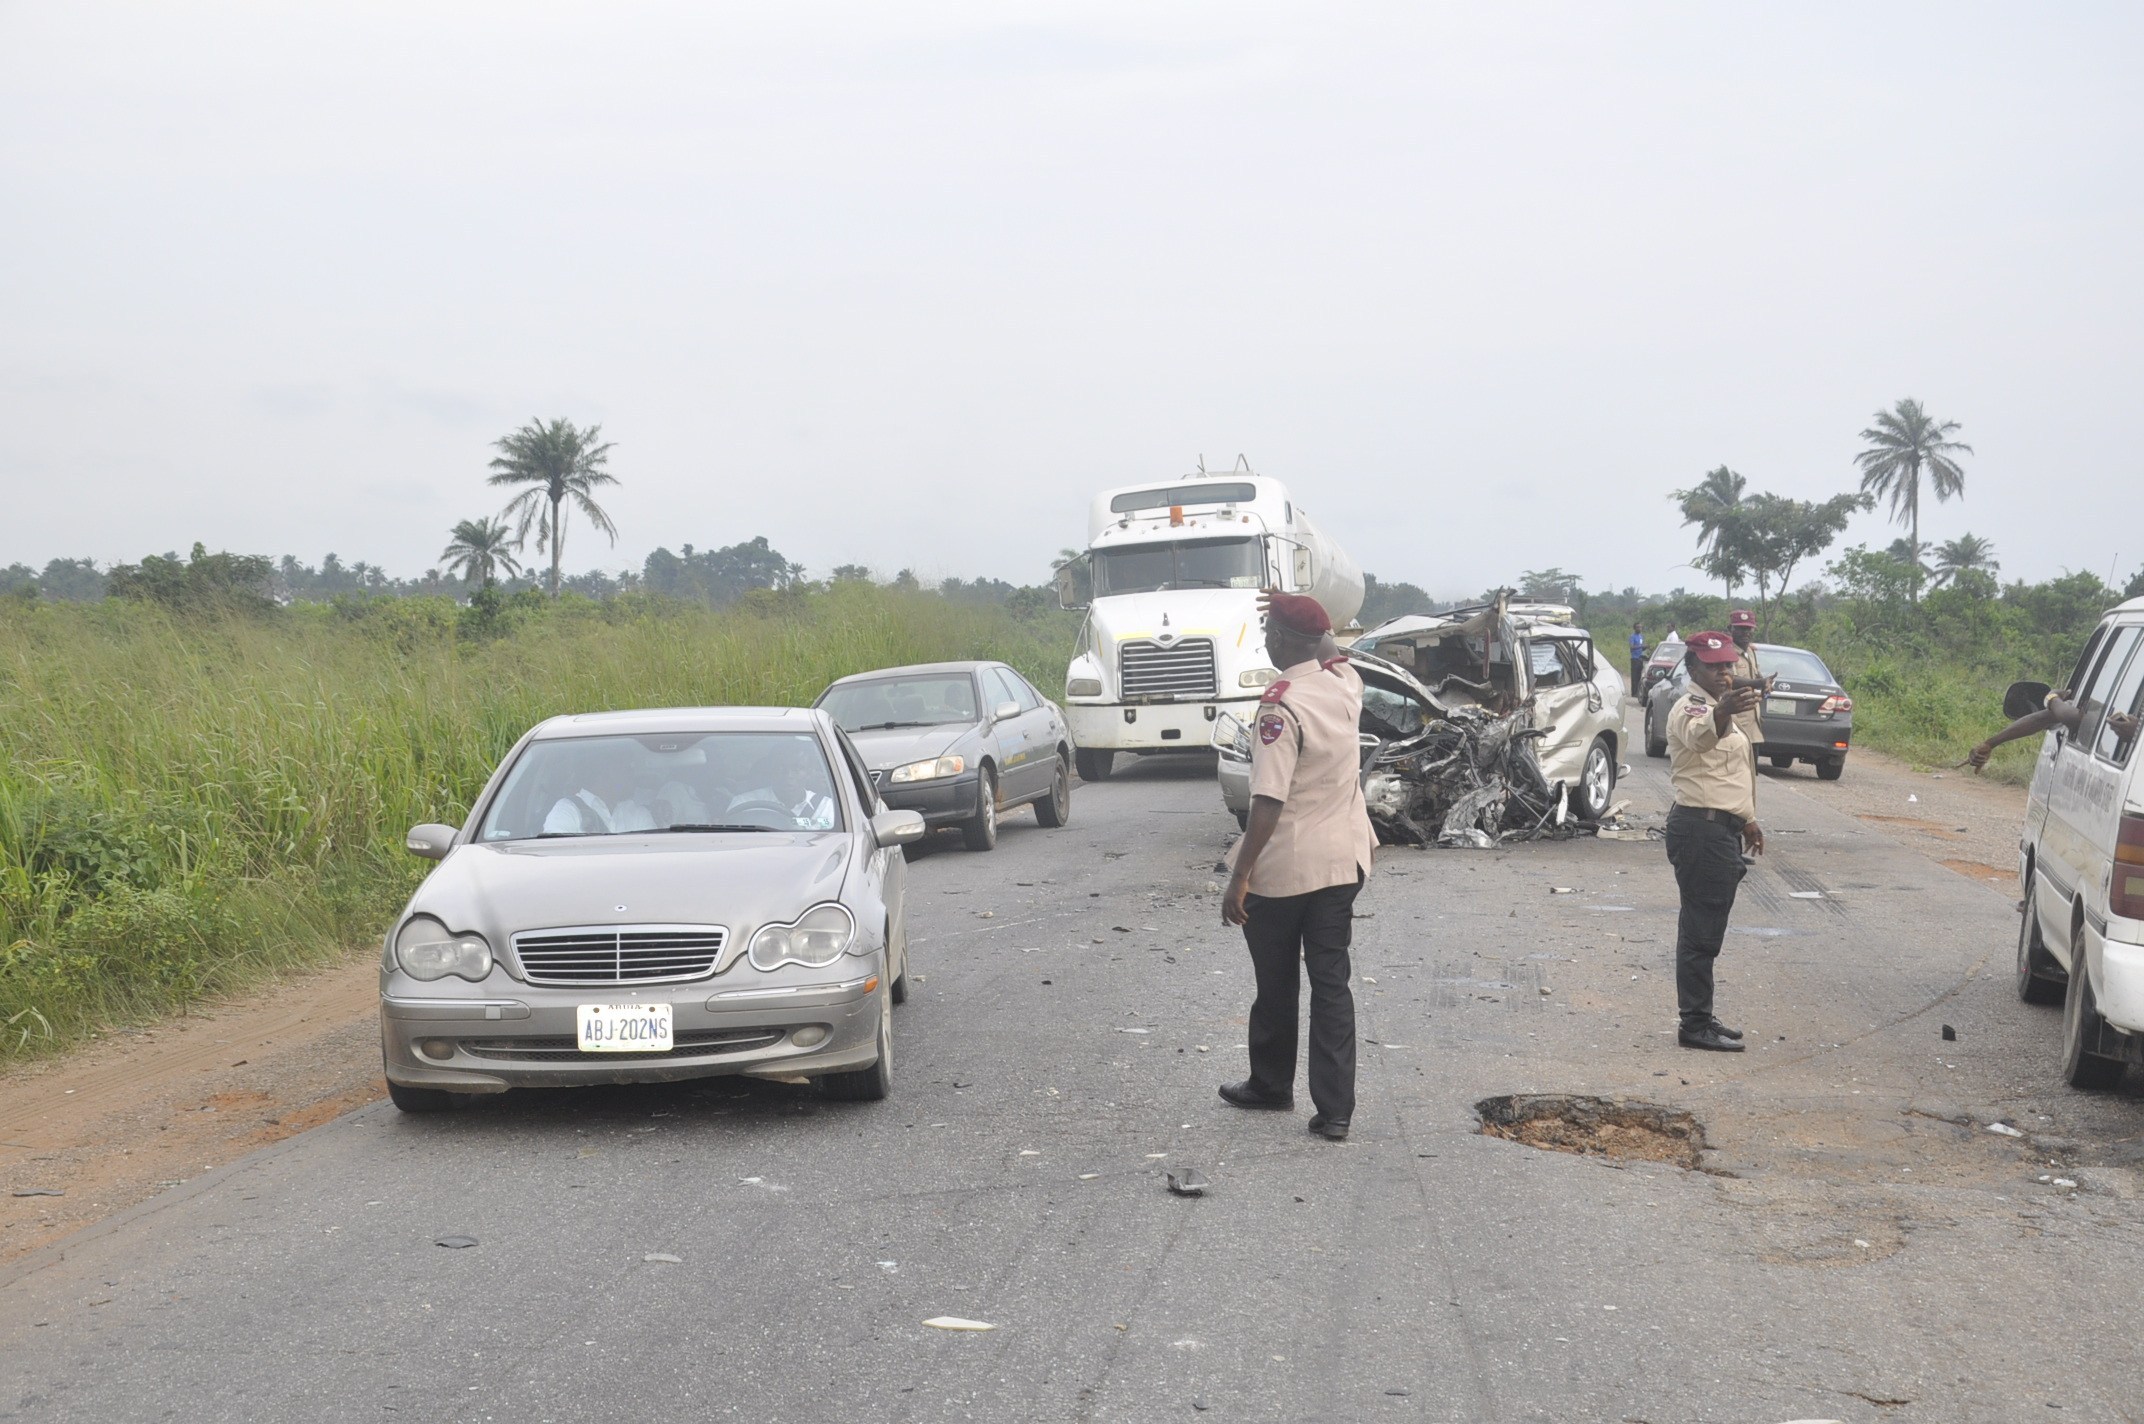 2,080 road crashed occured in Q2, 855 Nigerians died- NBS